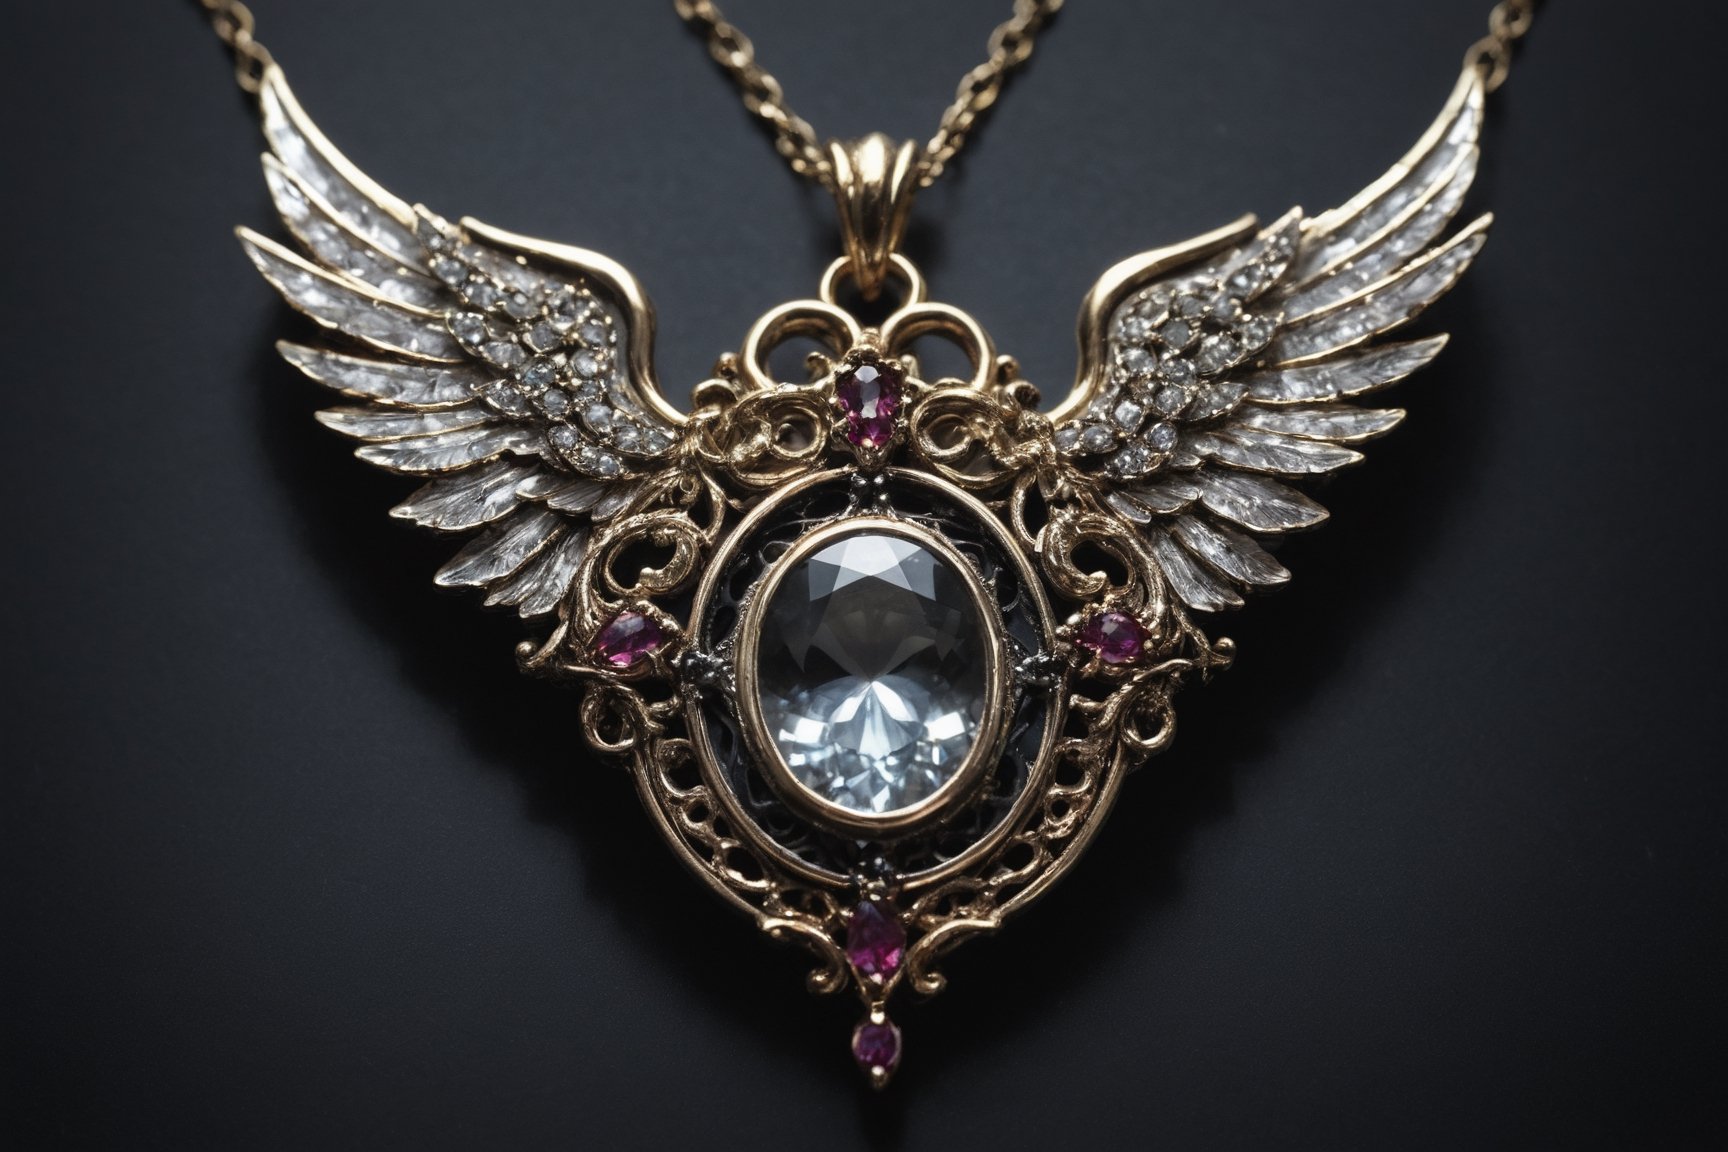 Photorealistic Images prompt structure:
"A realistic photograph capturing the ethereal beauty of an Angelic Gift, surrounded by the dark and mysterious aura of Necroduality. The Angelic Gift is depicted as a delicate and intricate piece of jewelry, adorned with angelic symbols and glowing gemstones. The background is shrouded in shadows, with hints of eerie light illuminating the scene. The lighting accentuates the beauty of the Angelic Gift while adding a touch of darkness and intrigue. The camera captures the jewelry in a close-up shot, showcasing the fine details and craftsmanship. The lens used is a macro lens, allowing for a detailed view of the intricate design and the glowing gemstones. The image should have a high level of detail and a resolution of 8K, highlighting the exquisite beauty of the Angelic Gift and the mysterious aura of Necroduality."

Type of Image: Photograph
Subject Description: Angelic Gift surrounded by the aura of Necroduality
Art Styles: Realistic
Art Inspirations: Delicate jewelry, angelic symbols, dark aesthetics
Camera: Close-up shot
Shot: Shrouded in shadows with hints of eerie light
Render Related Information: Accentuated lighting, macro lens, 8K resolution